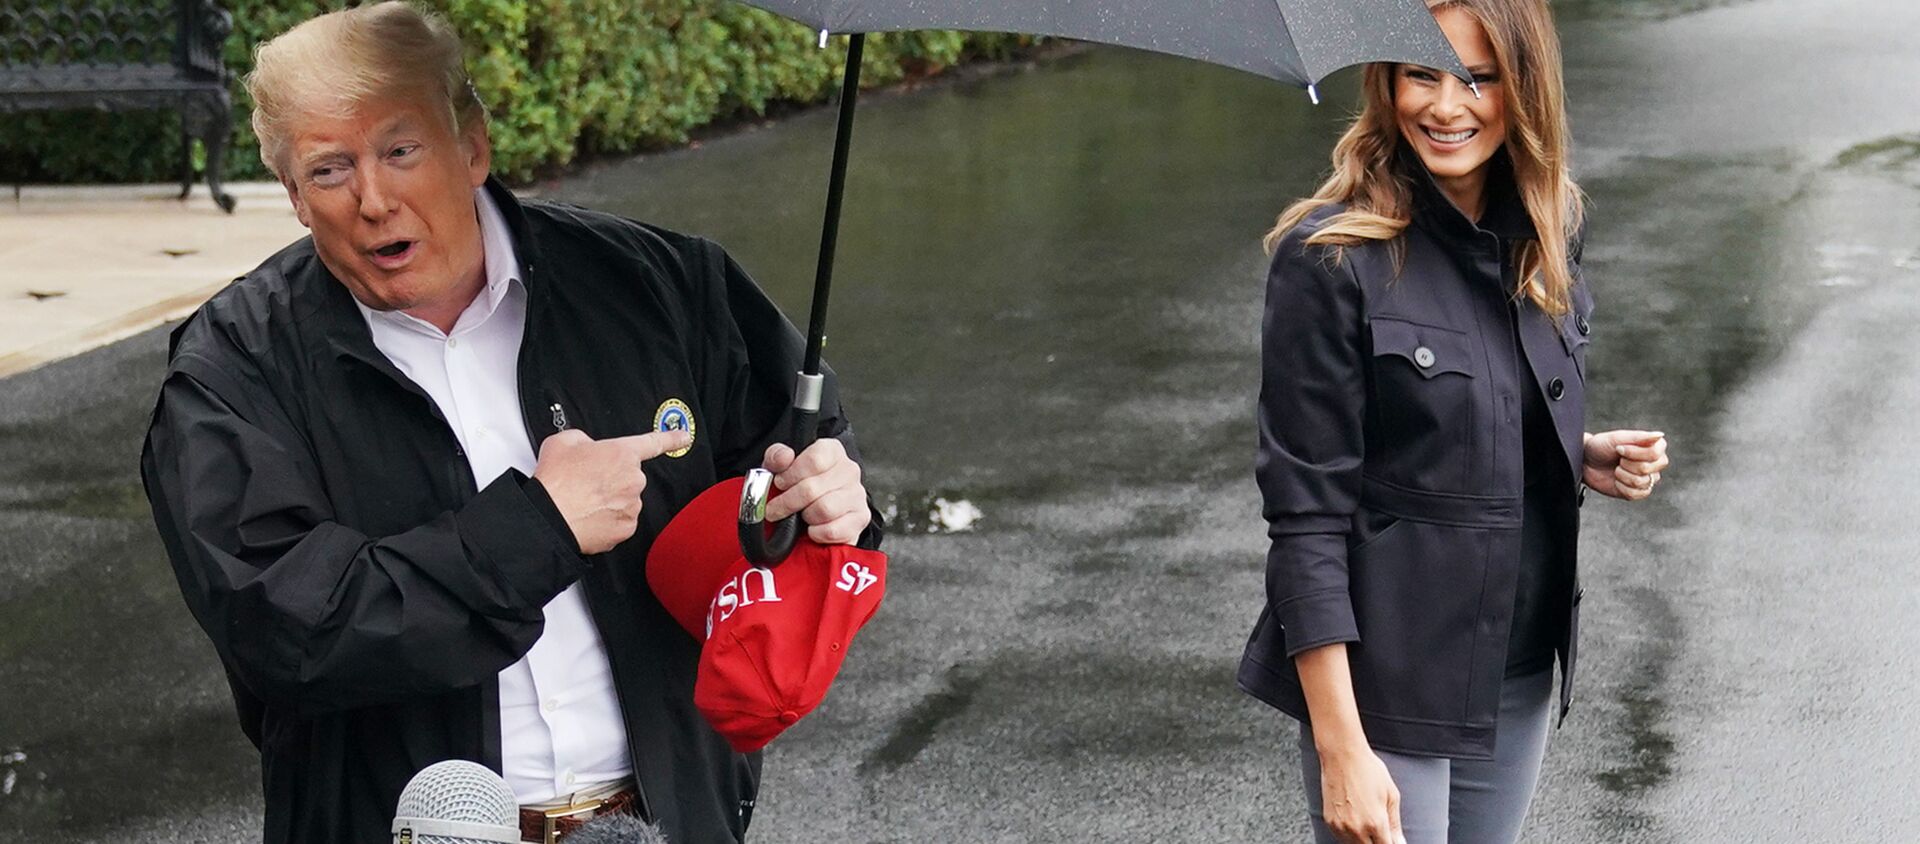 US President Donald Trump and First Lady Melania Trump make their way to board Marine One from the South Lawn of the White House in Washington, DC on October 15, 2018. - Trump is heading to Florida after Hurricane Michael devastated the state.  - Sputnik International, 1920, 26.08.2019